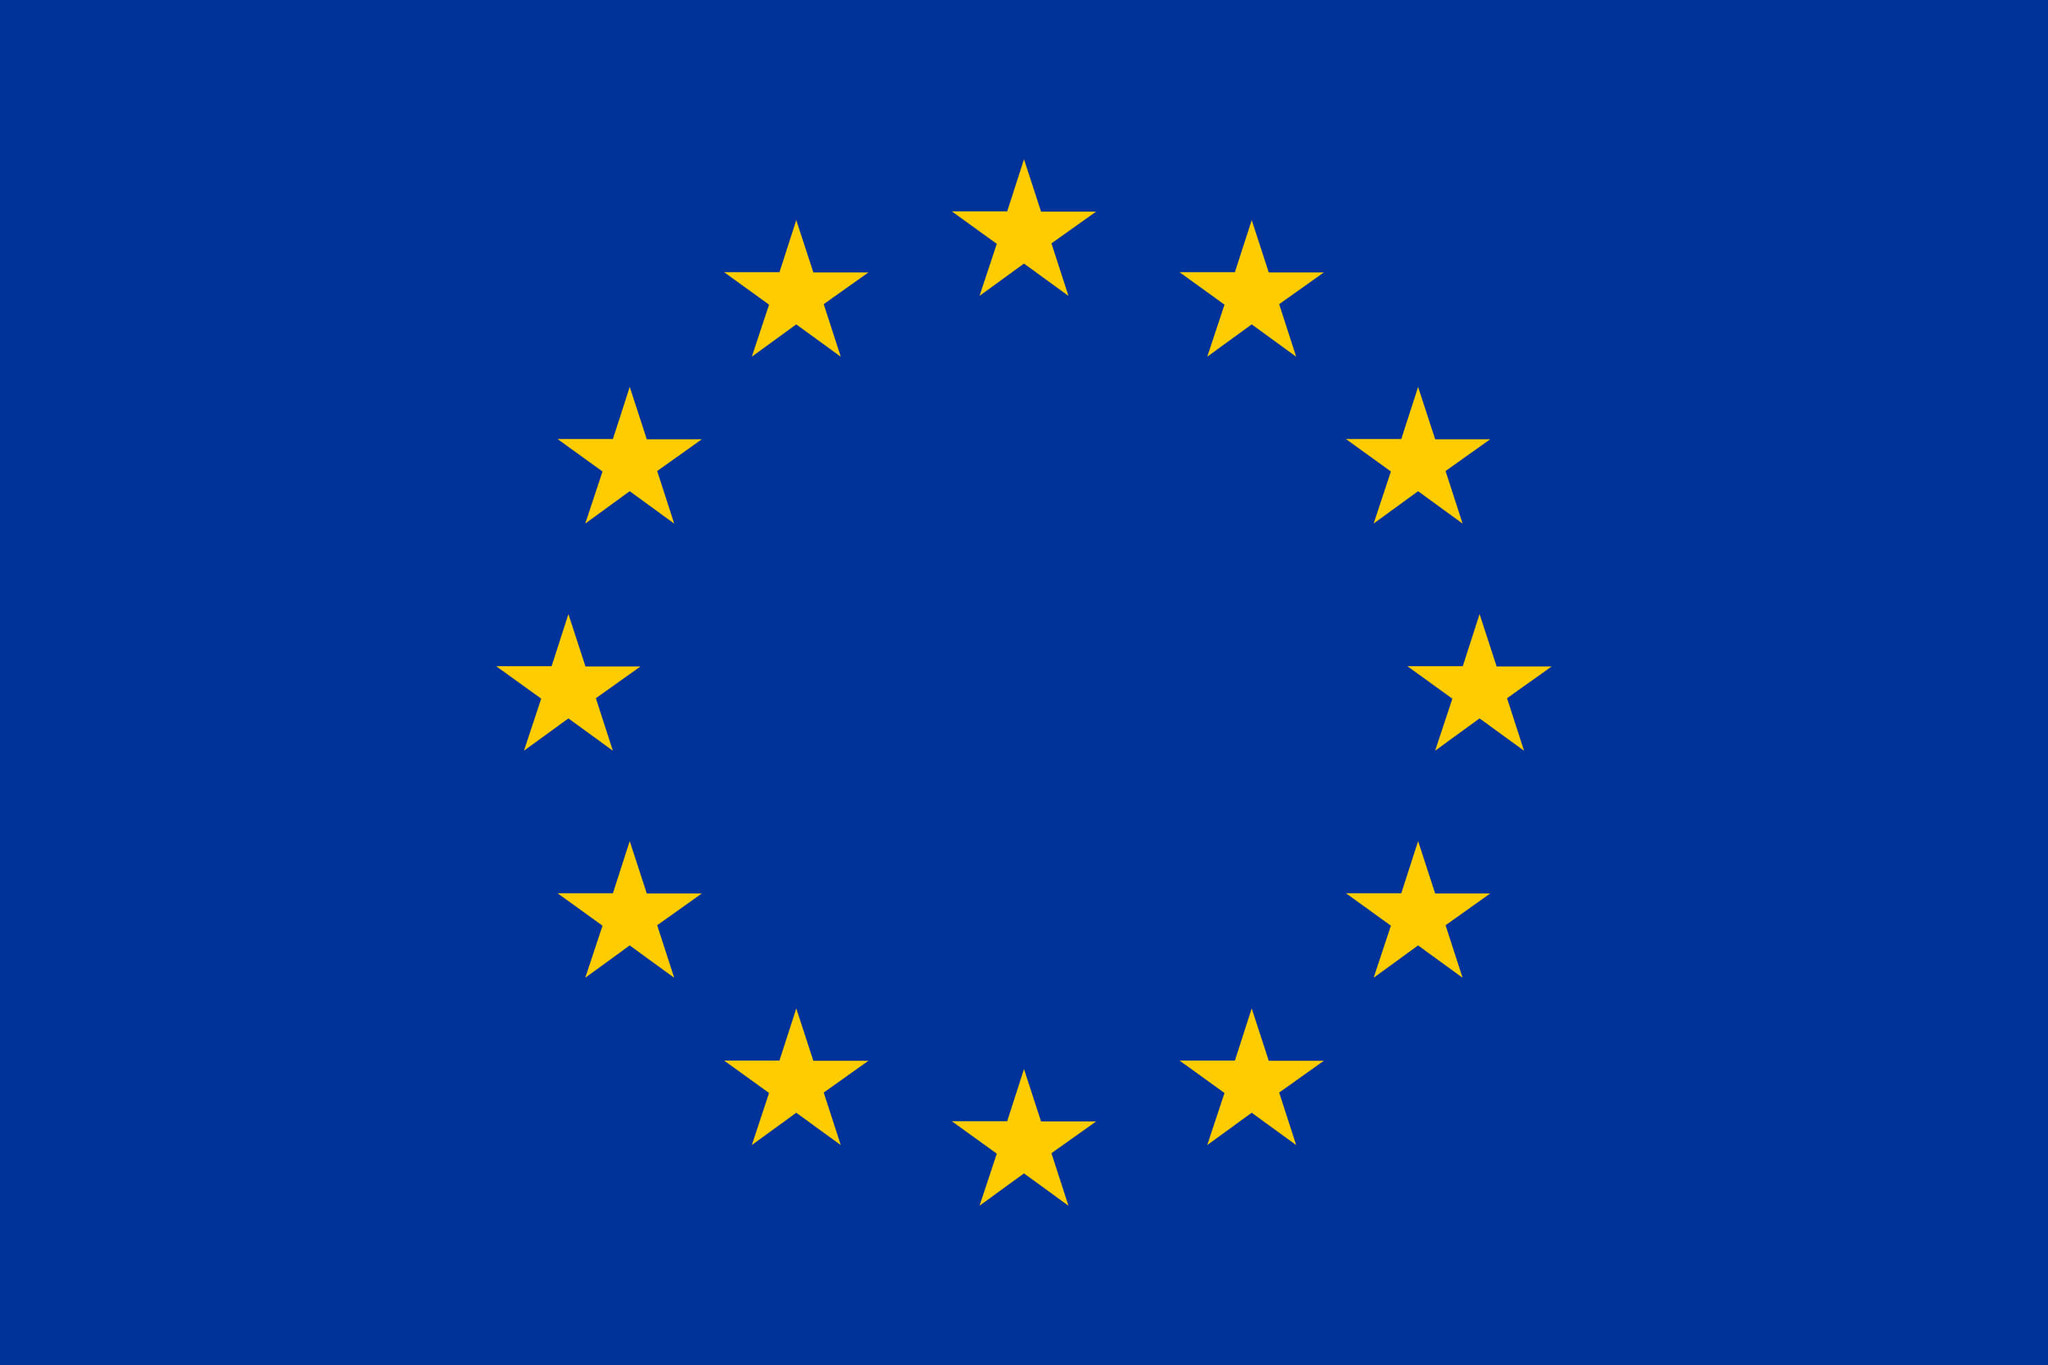 Flag of Europe image and meaning European flag - Country flags